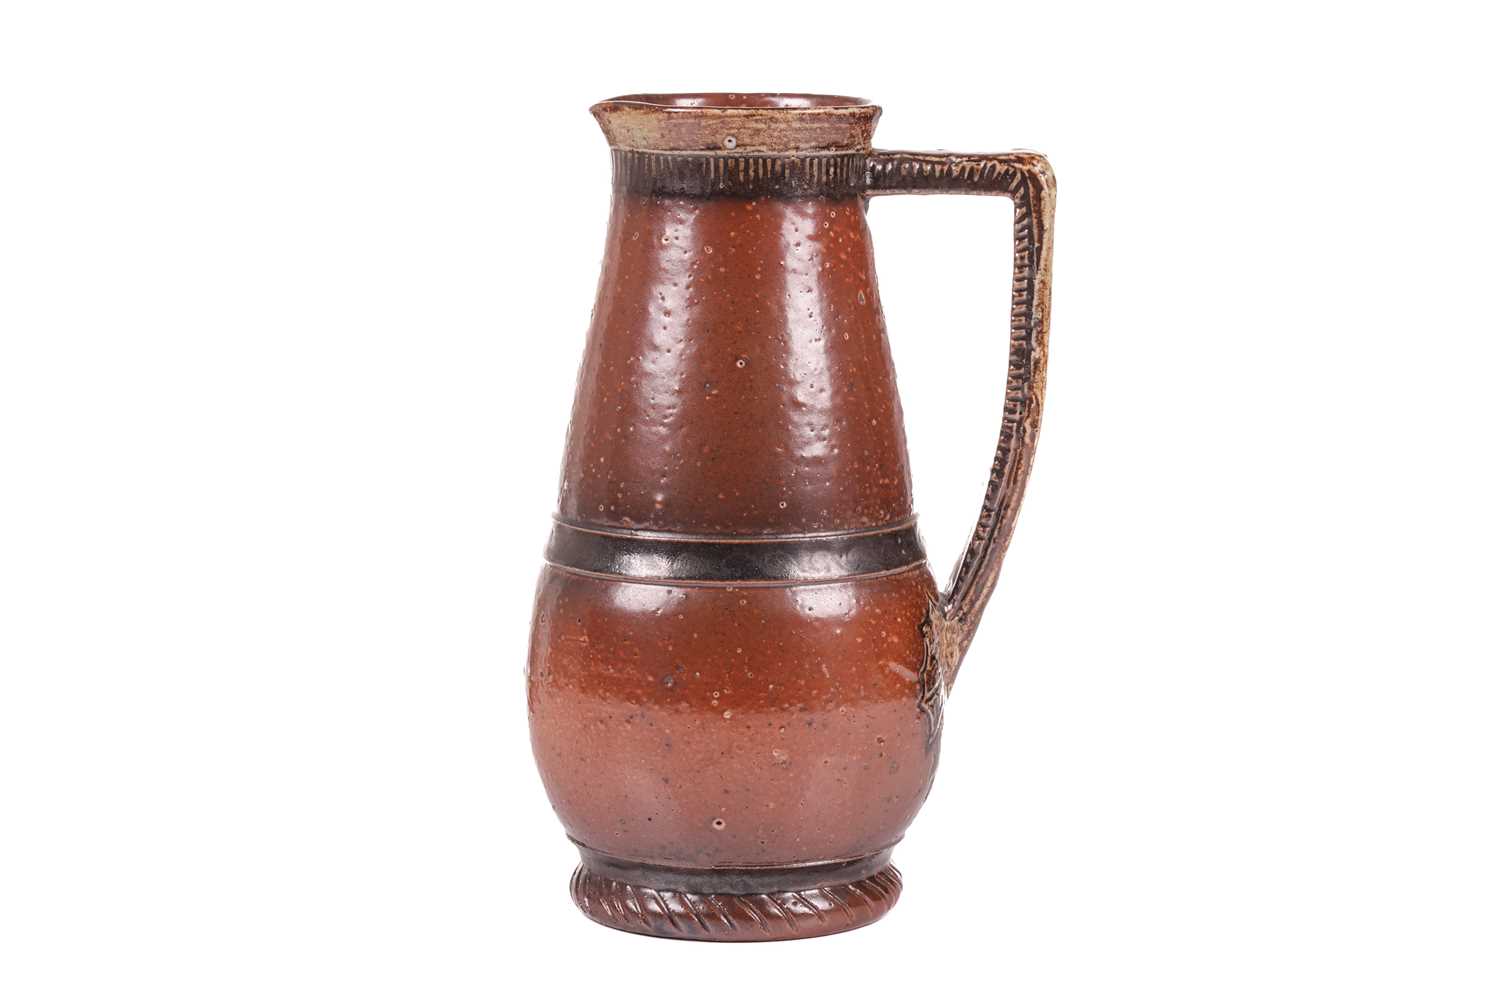 A late 19th-century Martin Brothers salt-glazed jug, by Robert Wallace Martin, of traditional form